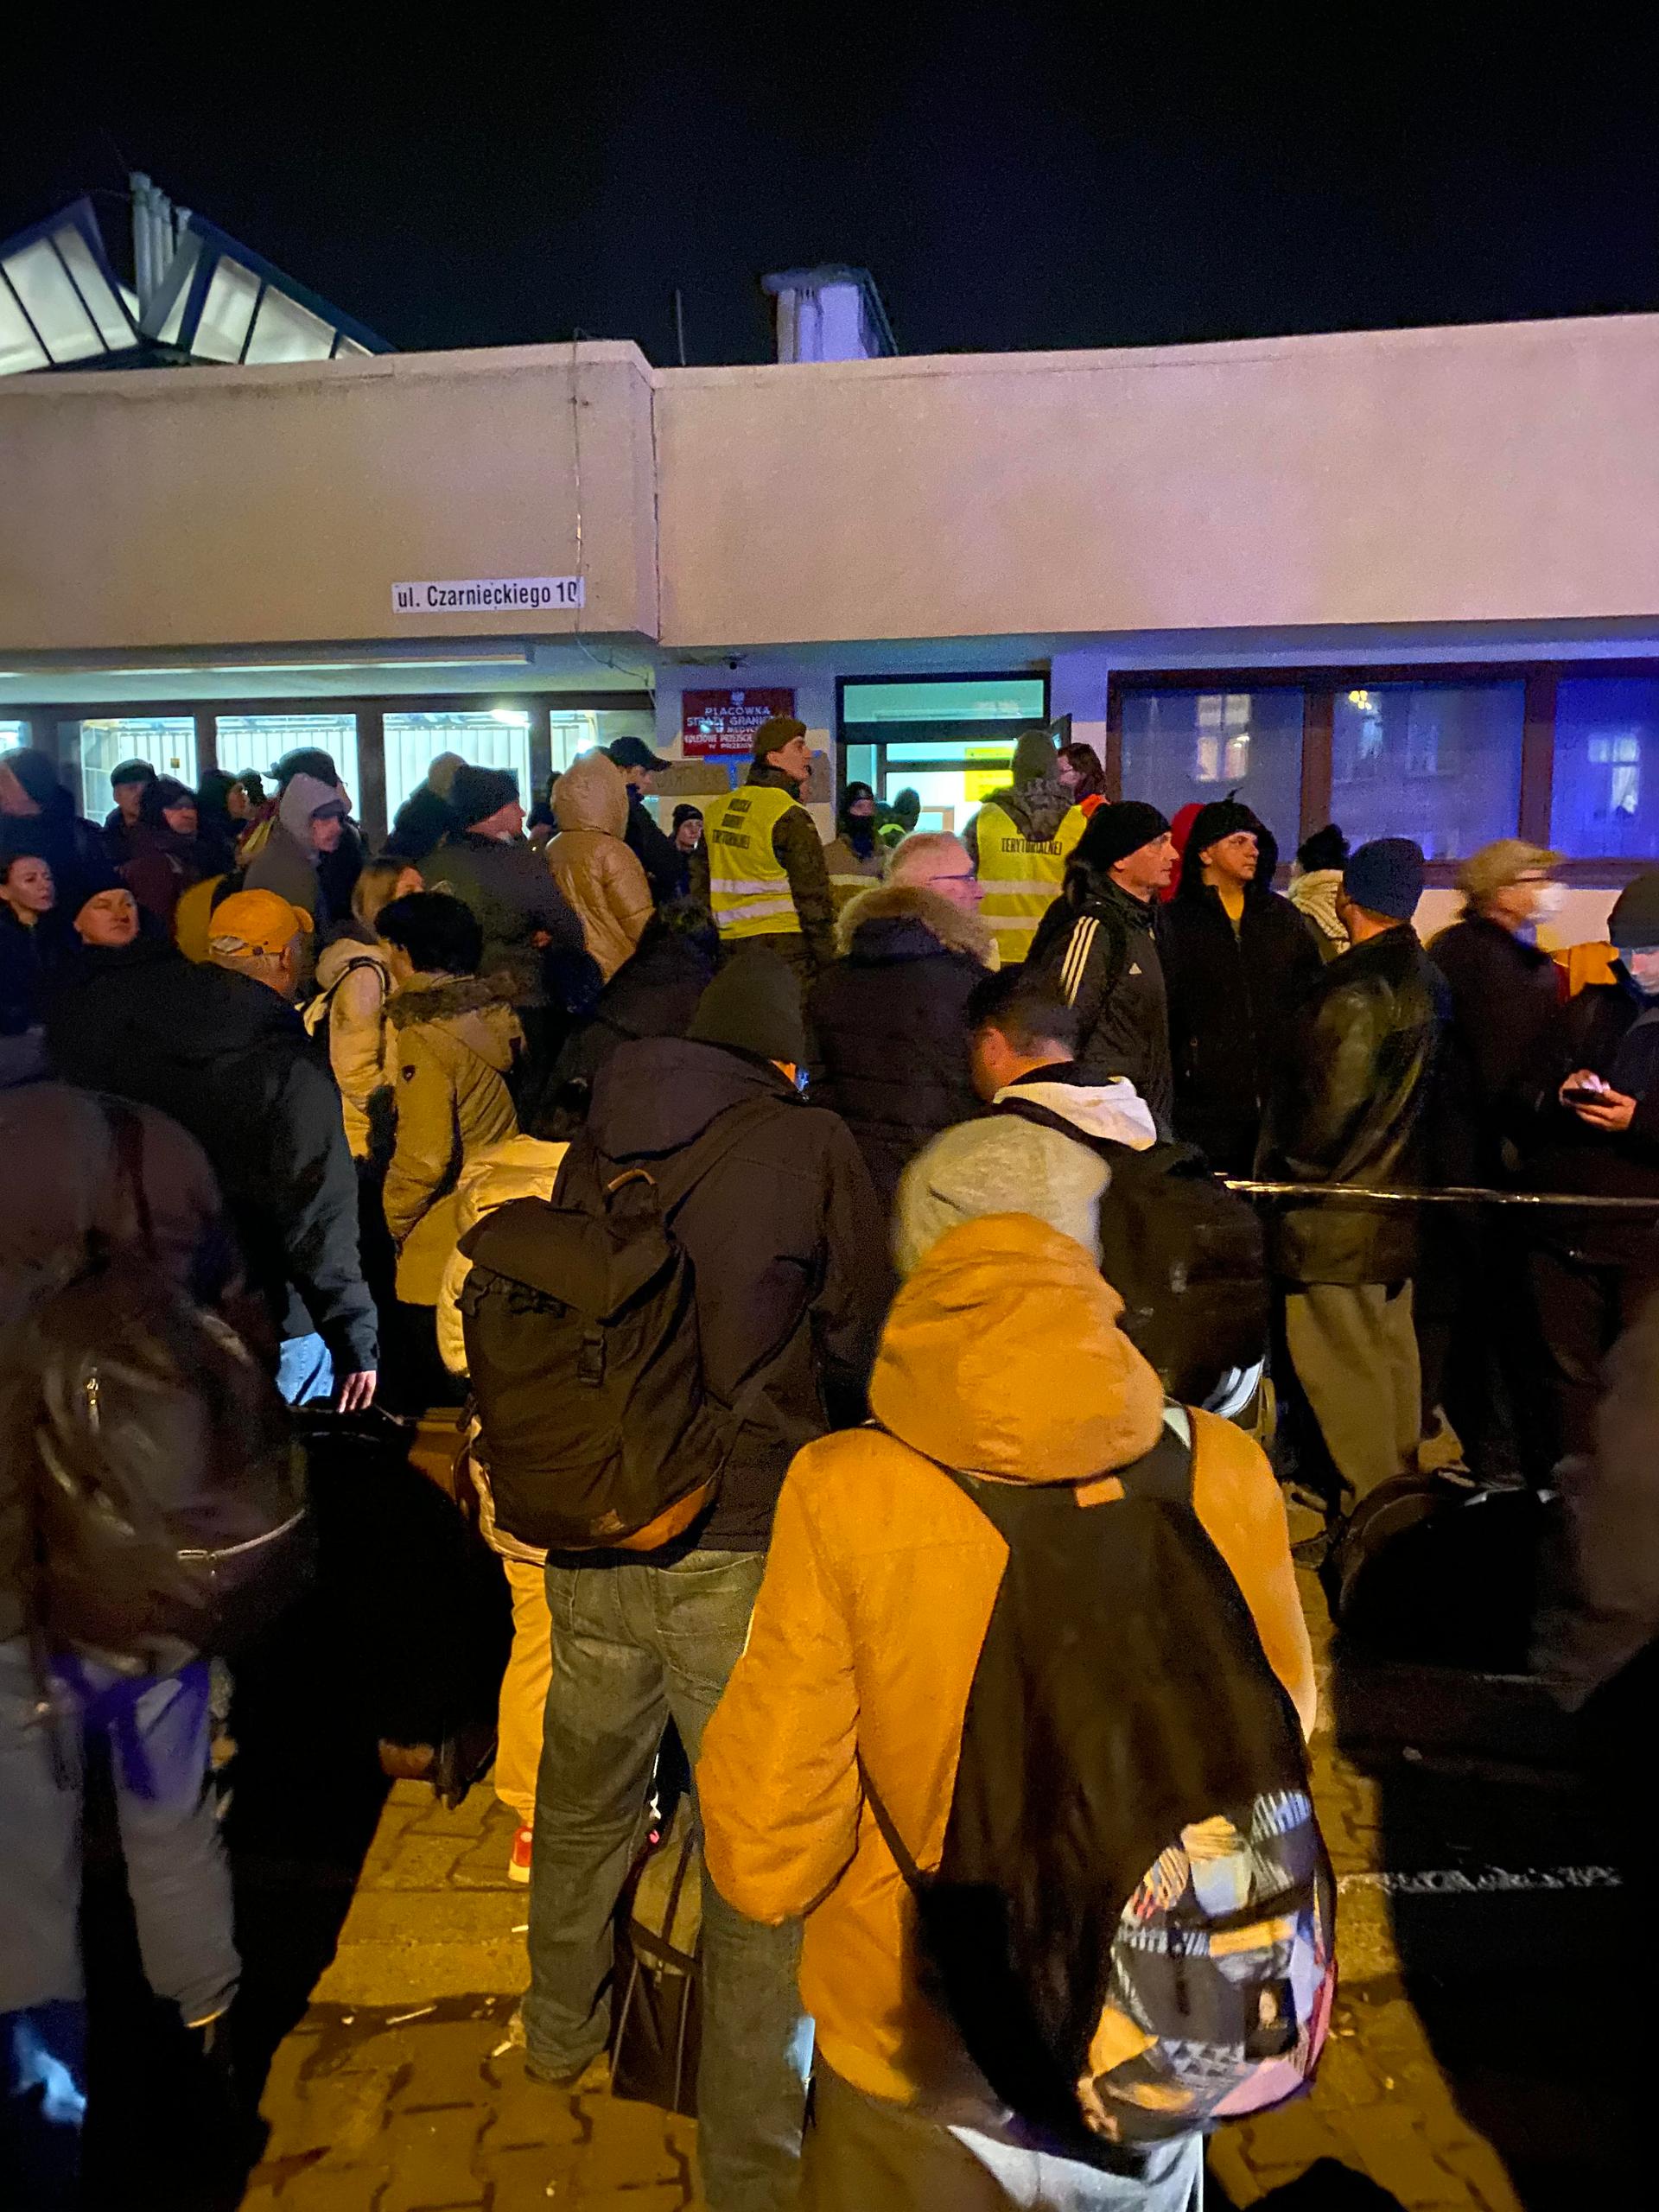 Ukrainians wait to board trains back home at the train station in Przemysl.